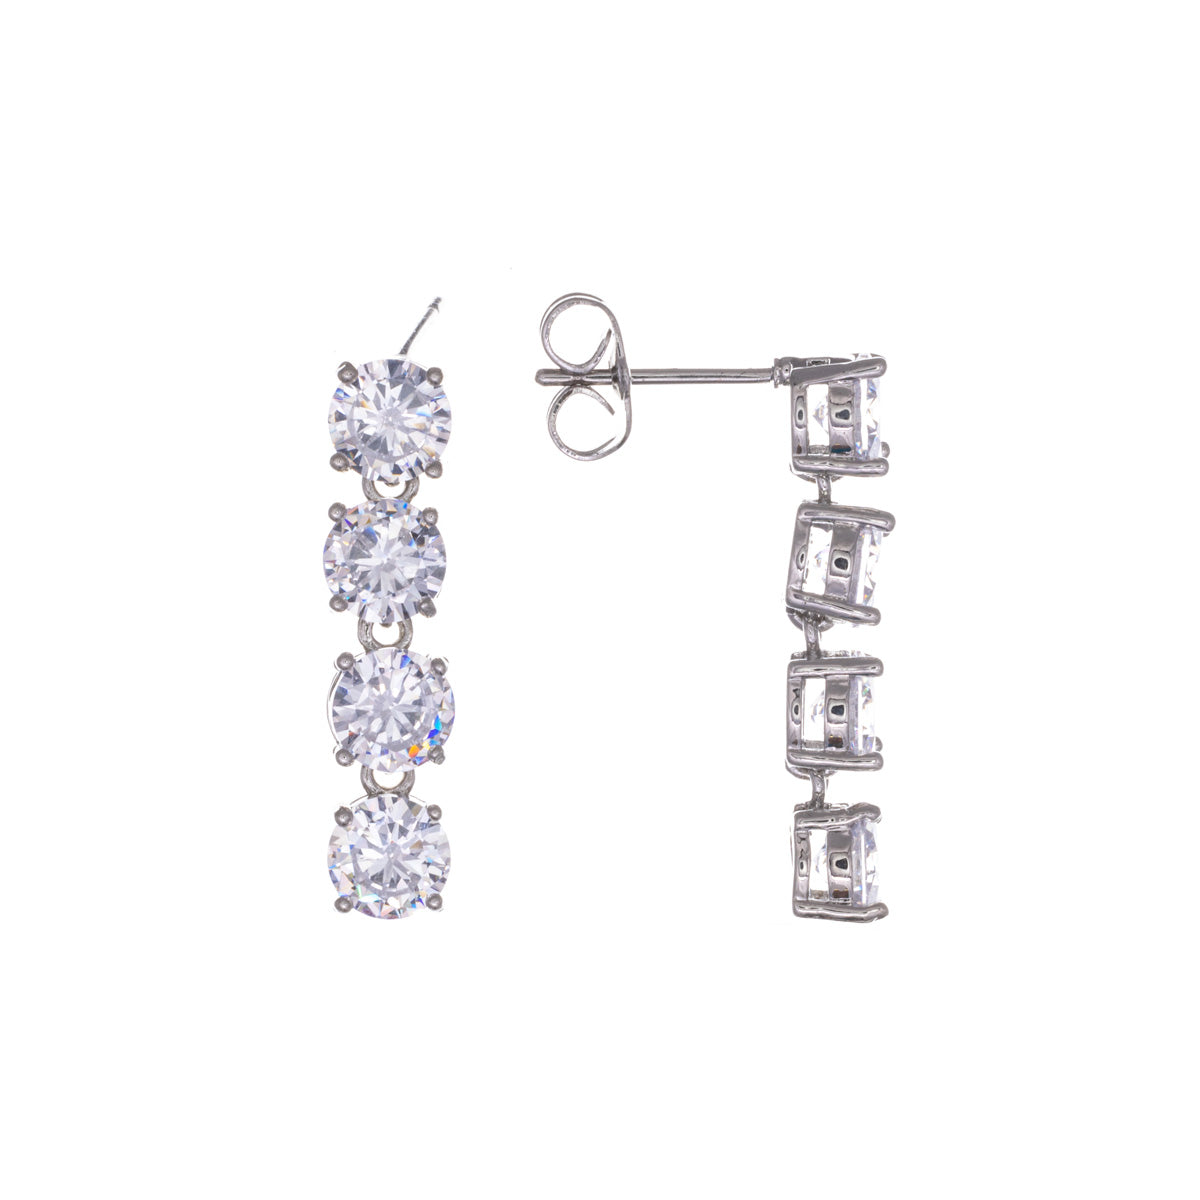 Dangling party earrings with four zirconia stones